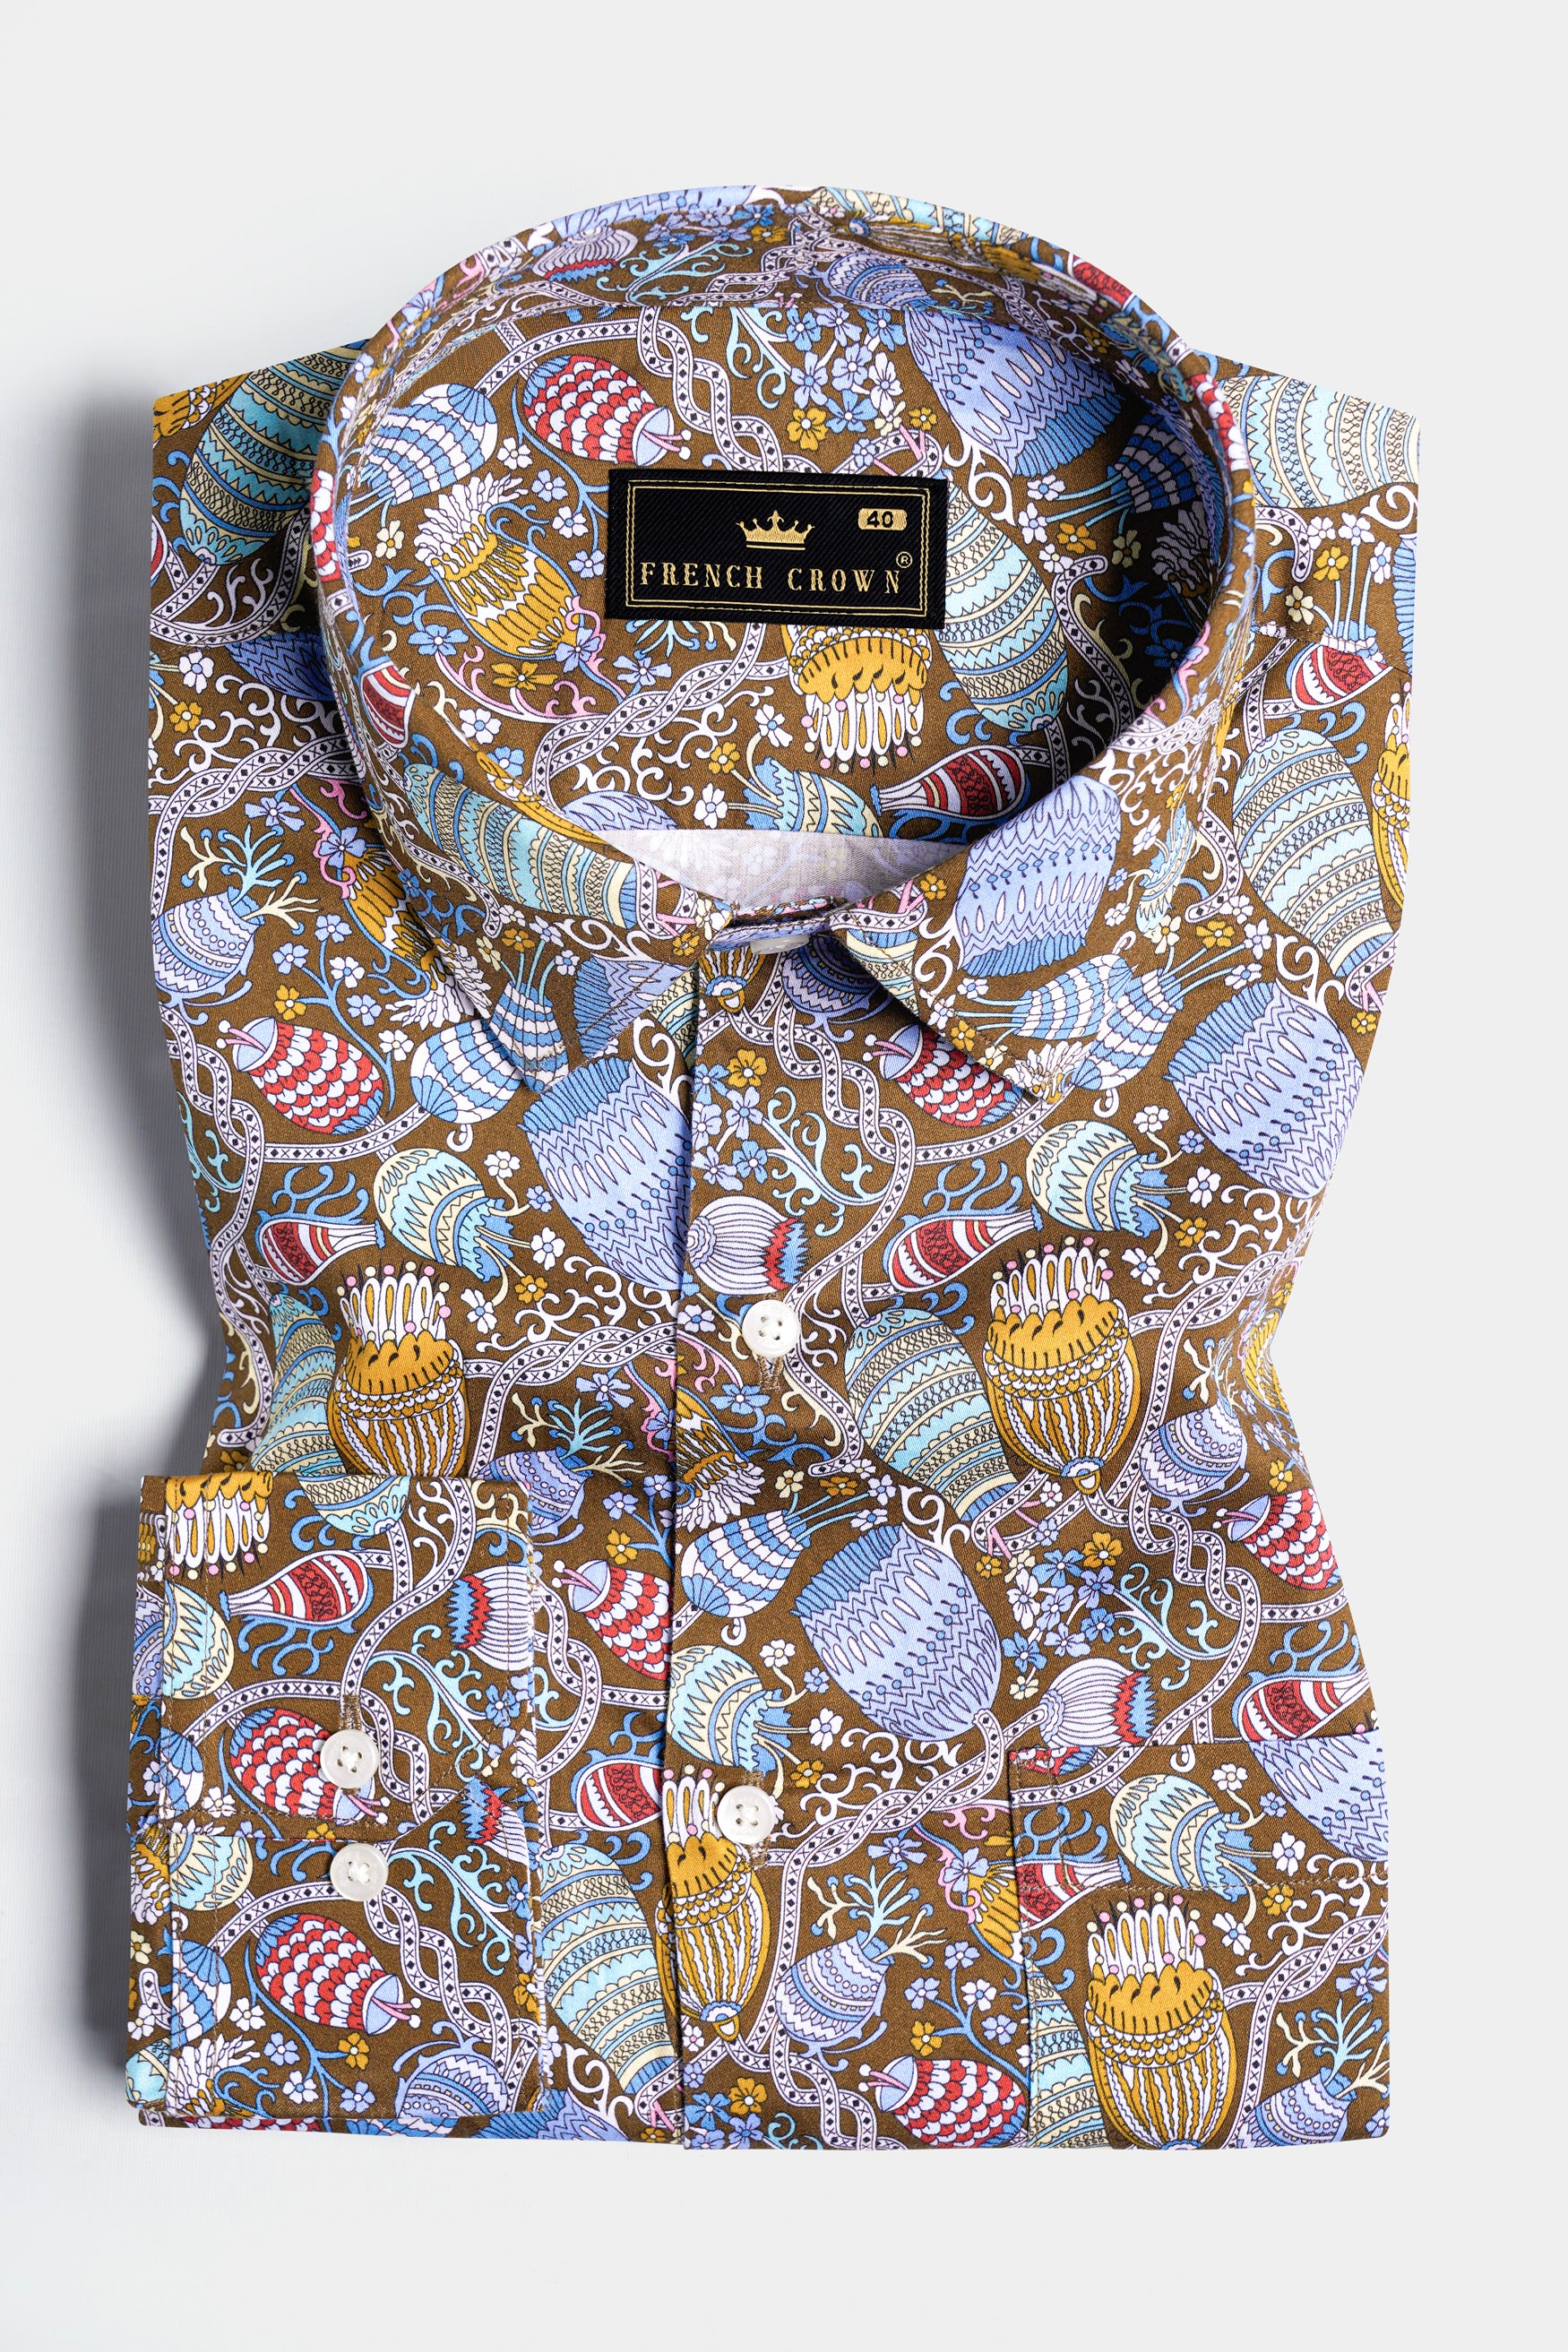 Nutmeg Brown with Iris Blue and Cadet Red Floral Printed Subtle Sheen Super Soft Premium Cotton Shirt 11703-38, 11703-H-38, 11703-39, 11703-H-39, 11703-40, 11703-H-40, 11703-42, 11703-H-42, 11703-44, 11703-H-44, 11703-46, 11703-H-46, 11703-48, 11703-H-48, 11703-50, 11703-H-50, 11703-52, 11703-H-52